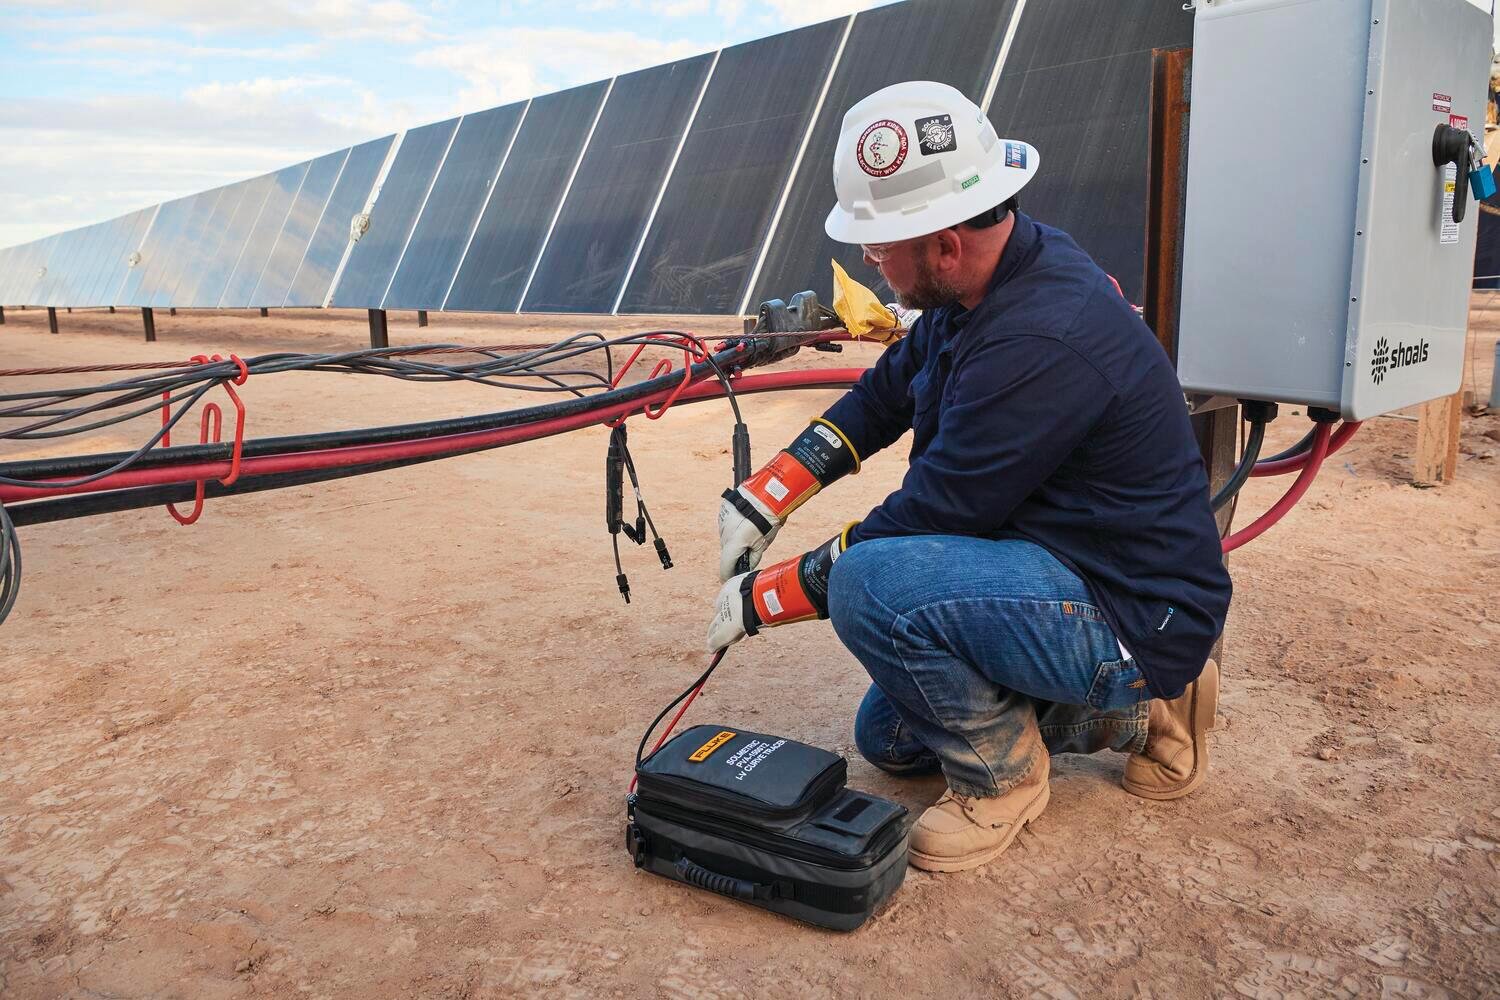 Technician kneeling beside solar PV array, connecting a tool to wiring